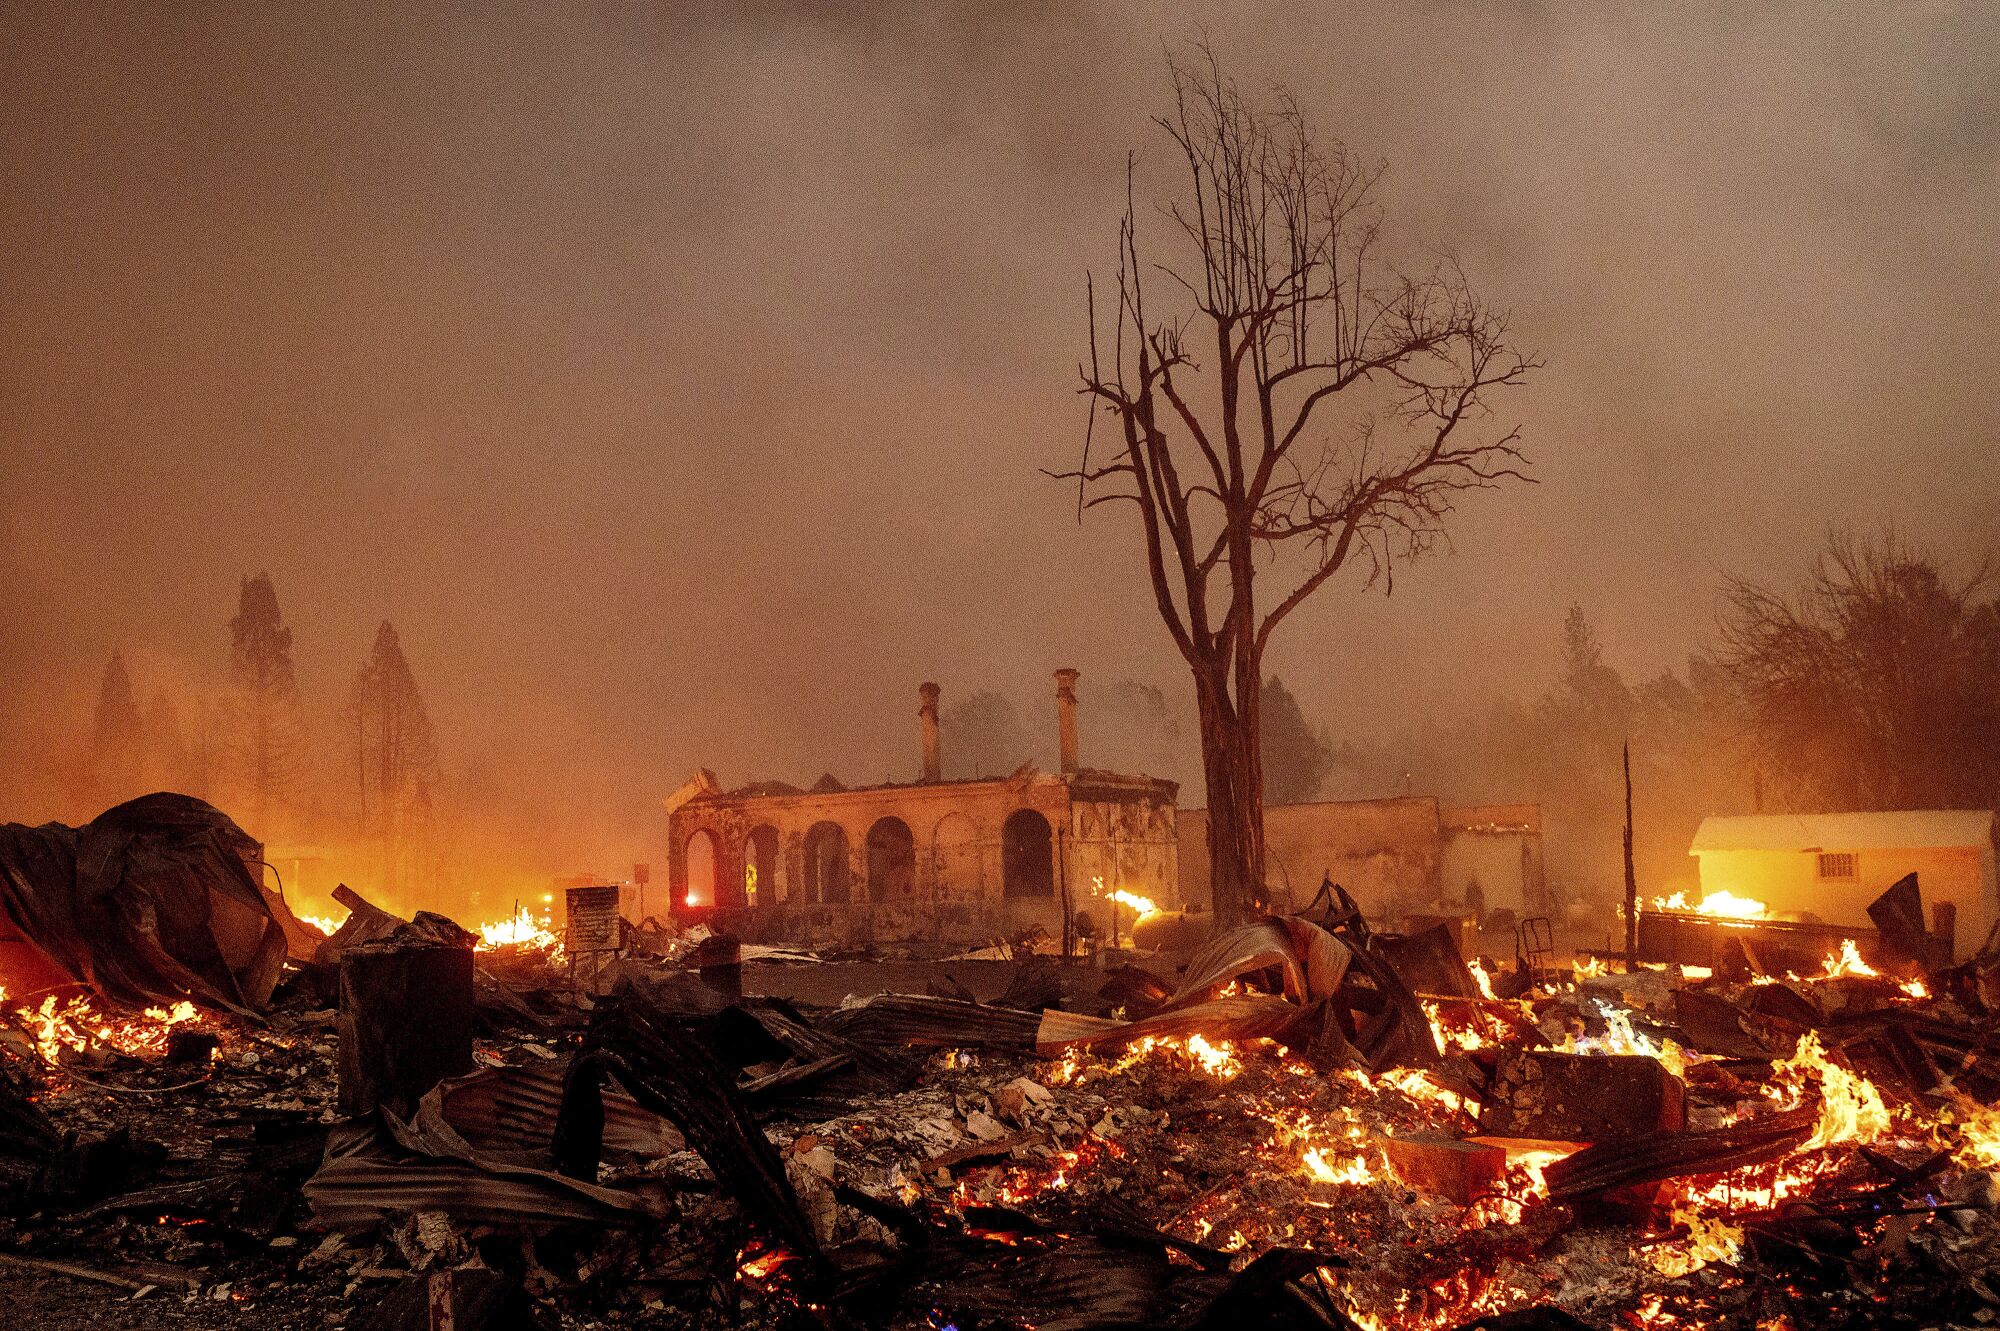 As dense smoke hangs over buildings, embers and flames cover the ground.